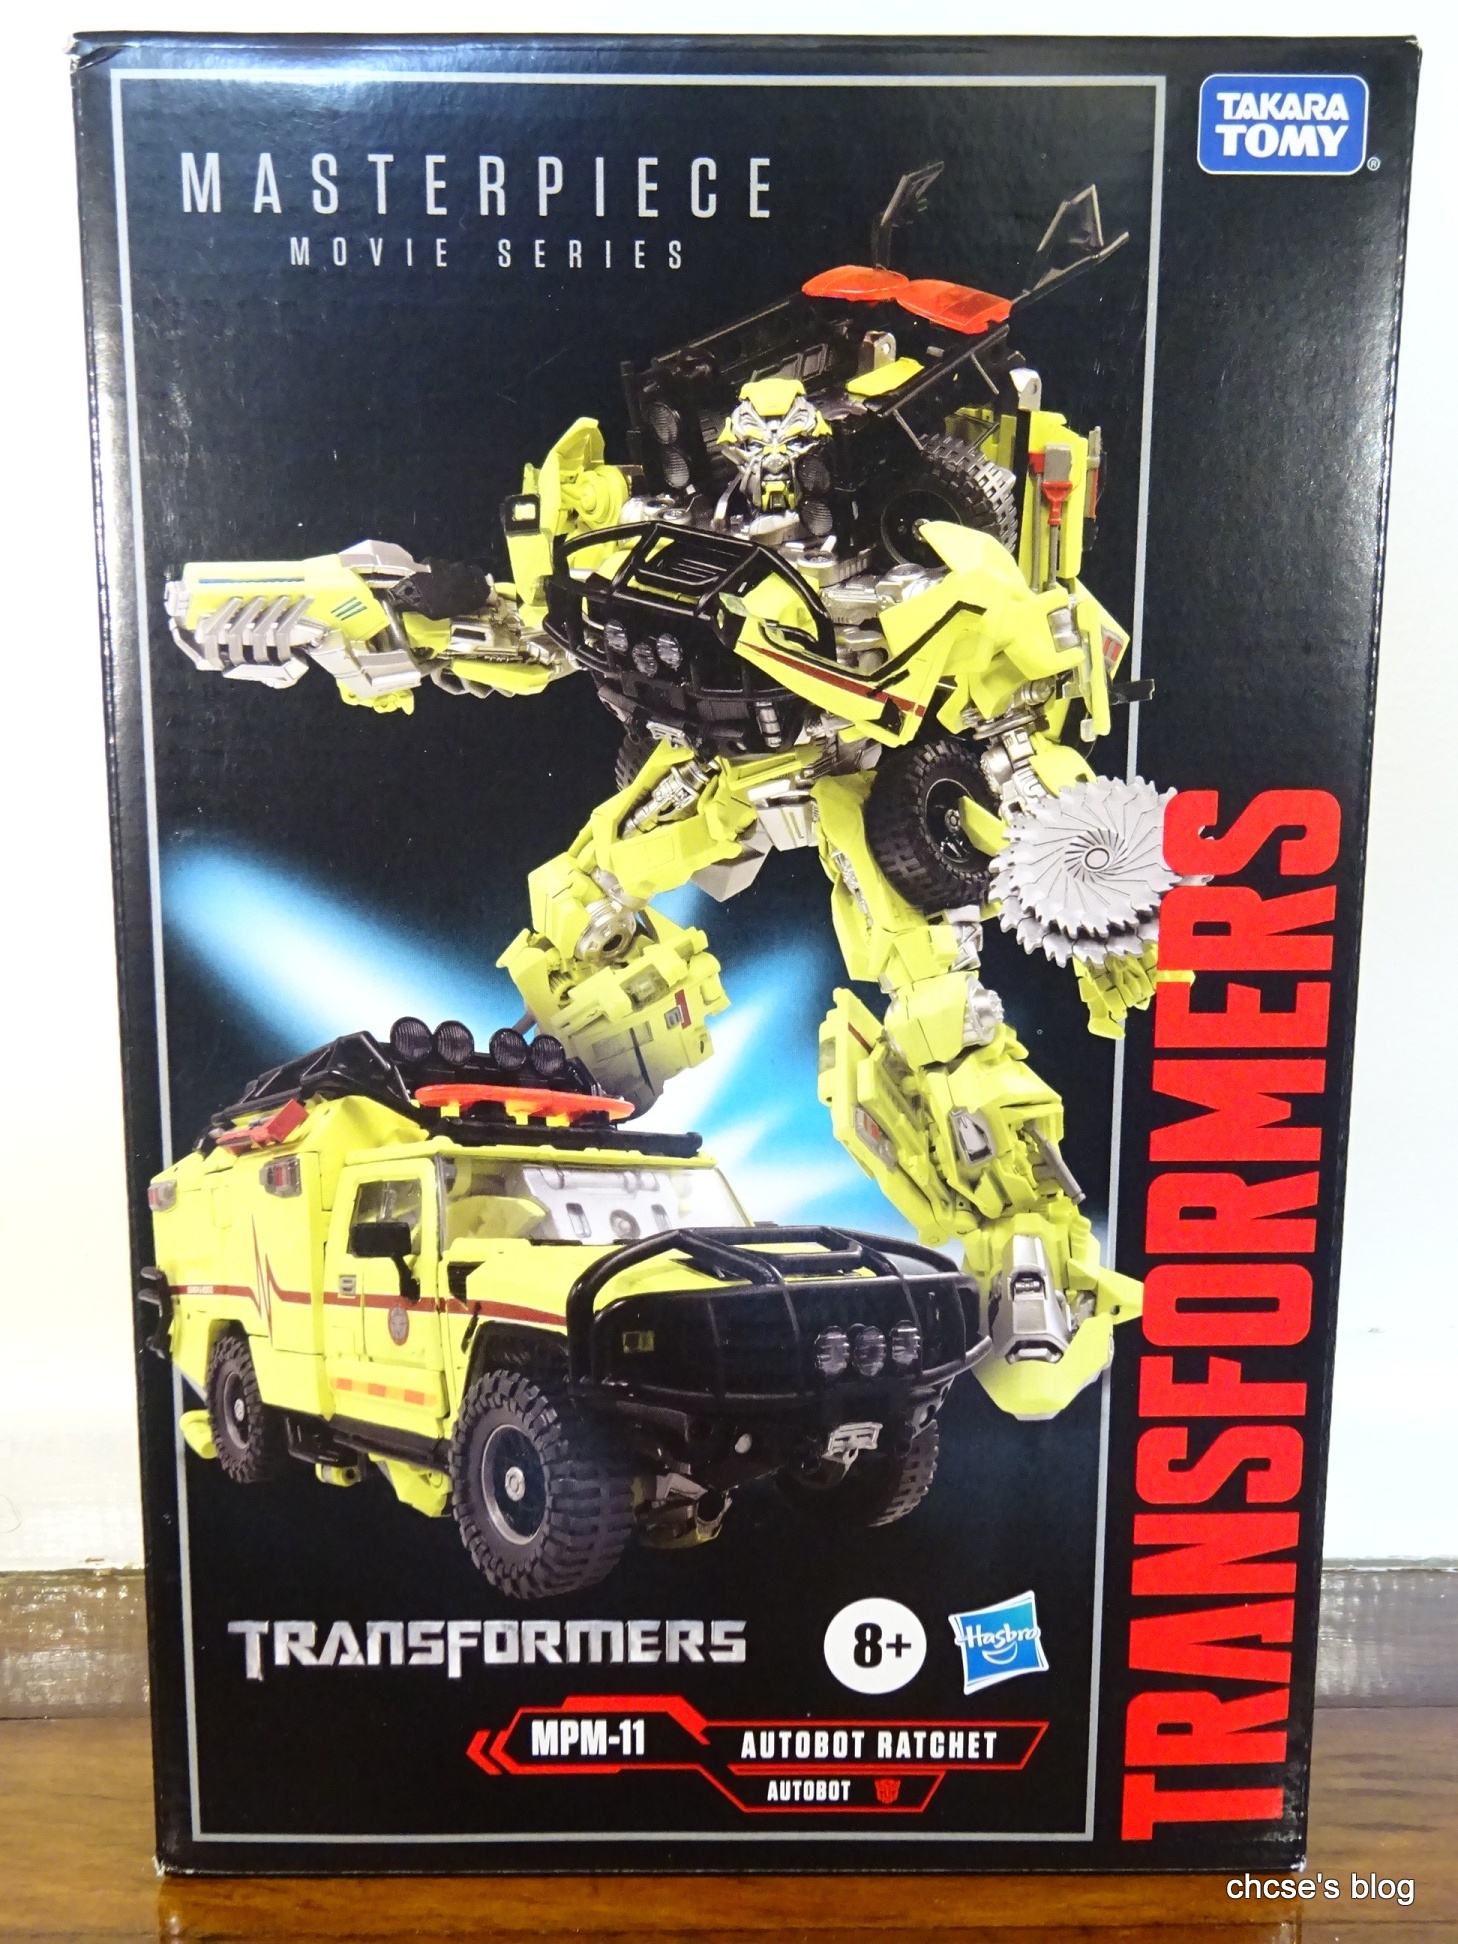 ChCse's blog: Toy Review: Transformers Masterpiece MPM Ratchet